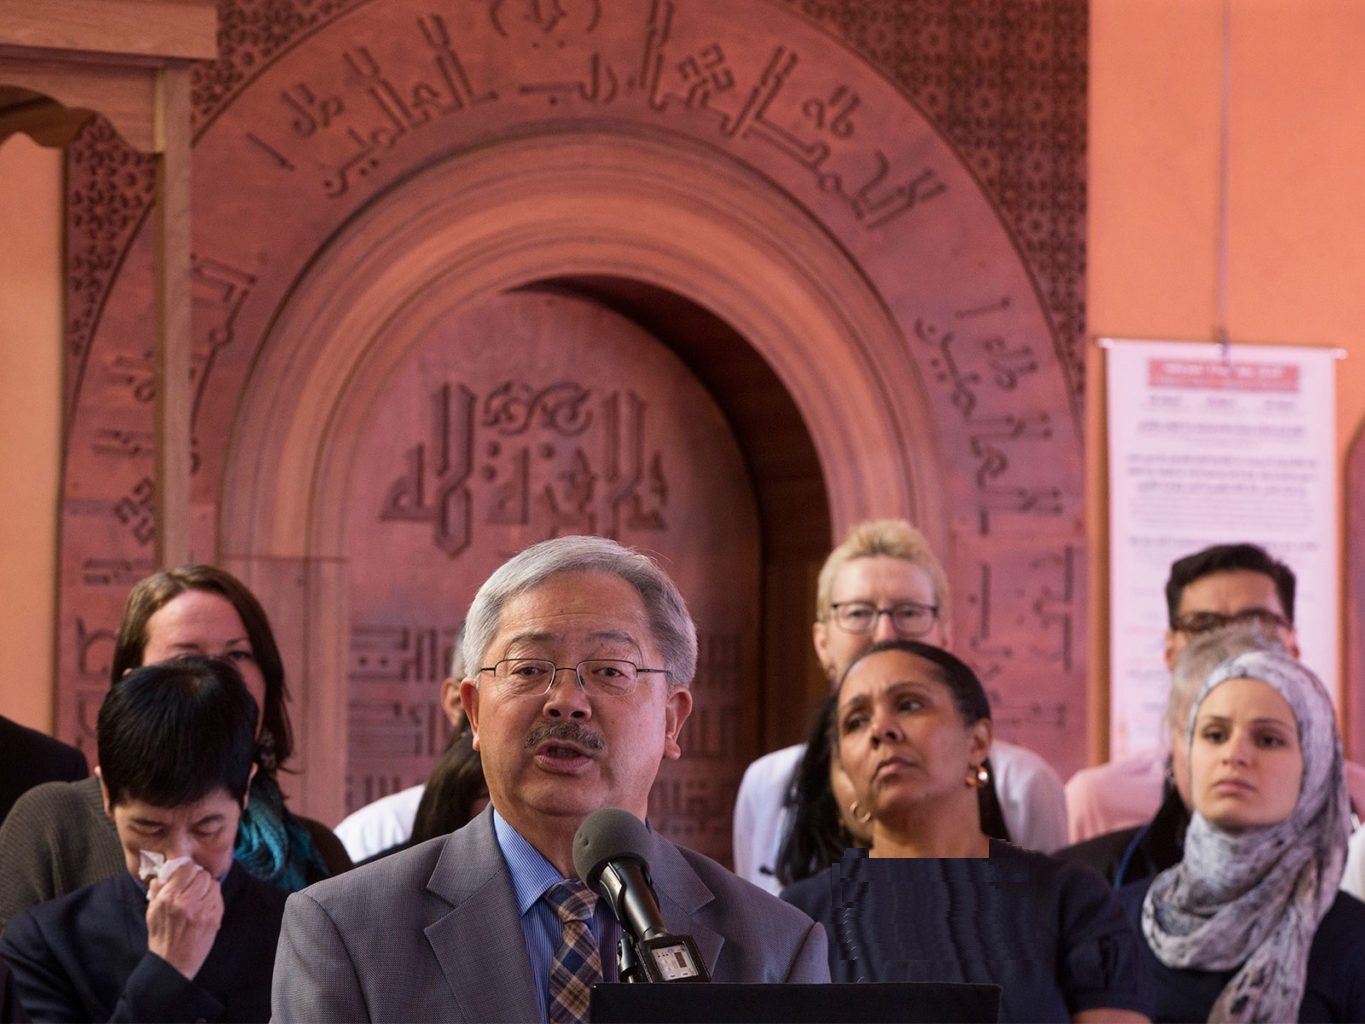 Mayor Ed Lee is joined by community members and immigrants during a news conference at the Islamic Society of San Francisco in the Tenderloin district Friday, January 13, 2017 defending The City’s choice not to participate in any type of registry under the Trump administration